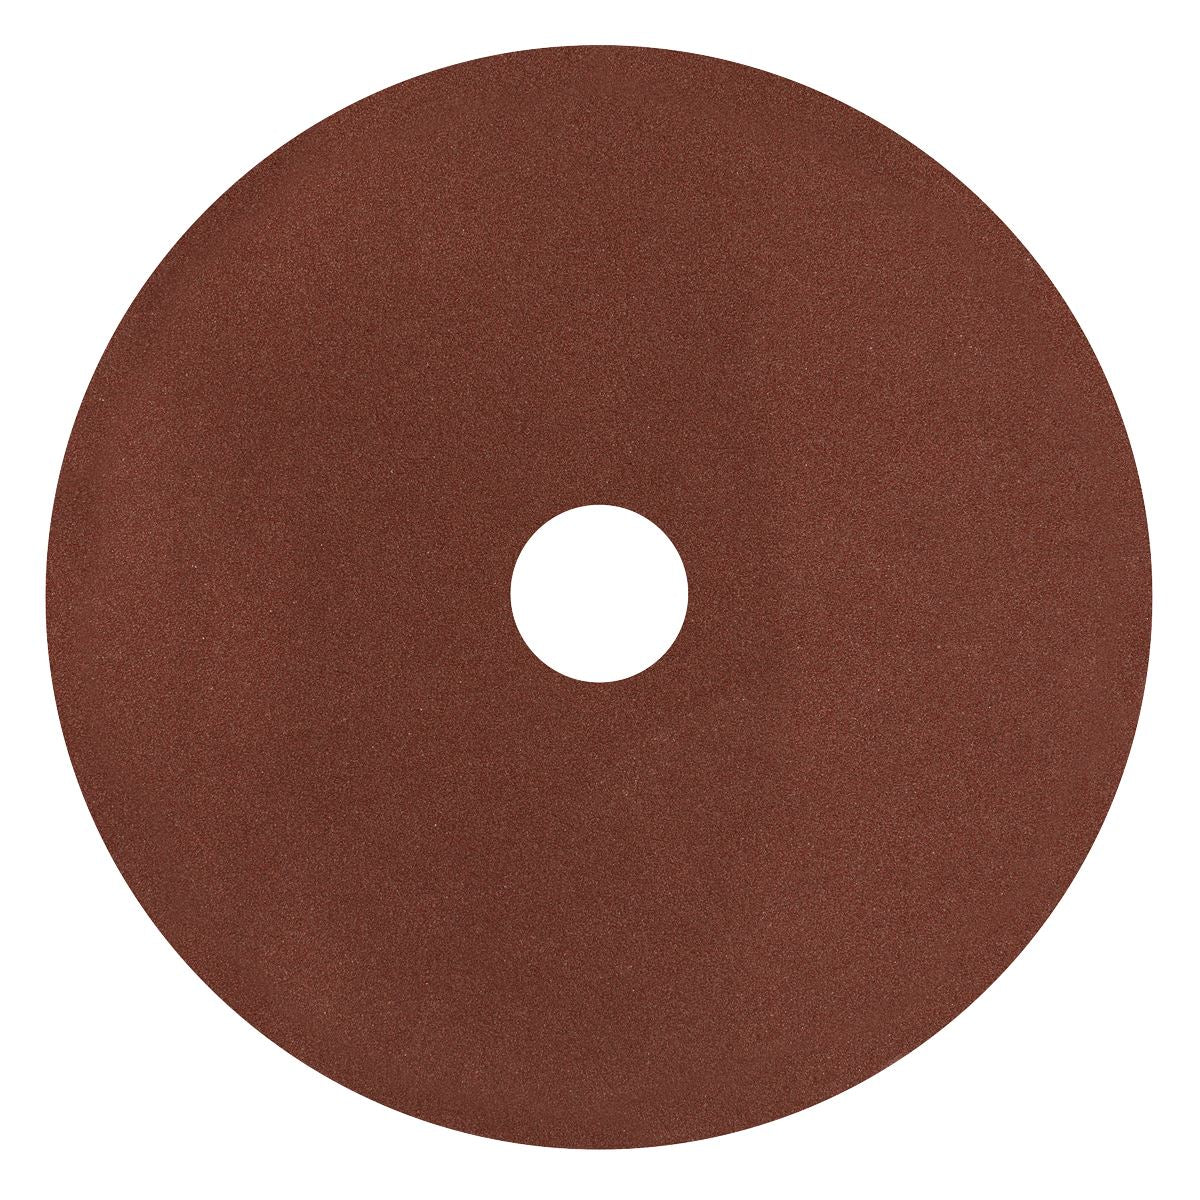 Worksafe by Sealey Fibre Backed Disc Ø100mm - 80Grit Pack of 25